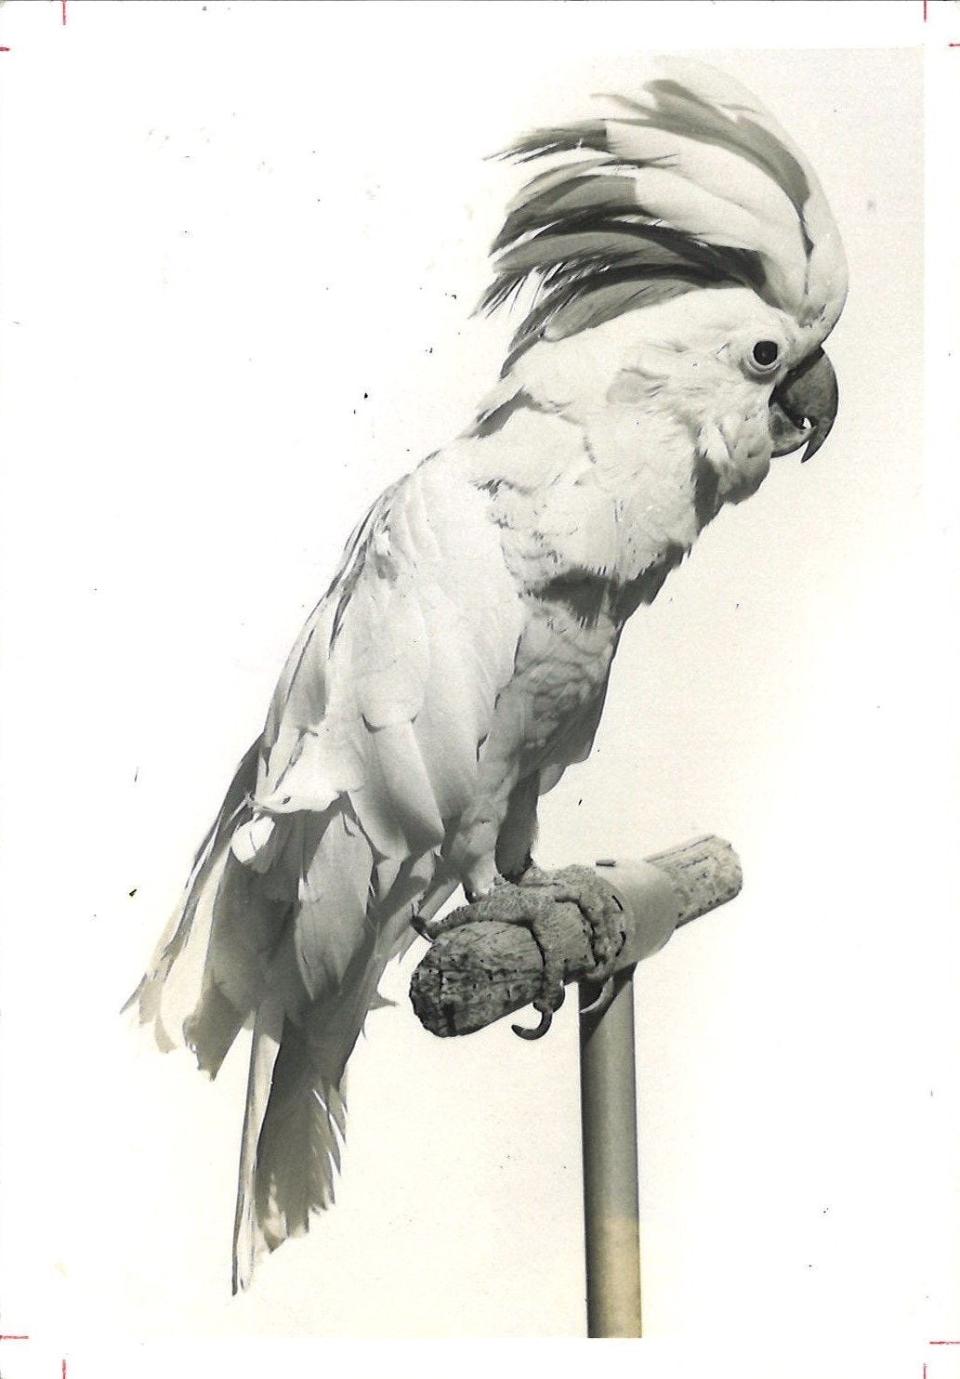 Polly, a Moluccan cockatoo who lived at the Utica Zoo for 53 years, seen here in a photo from 1978, has died, officials announced on Jan. 5, 2023. He was estimated to be 70 to 80 years old, making him the zoo's oldest and longest-term resident.